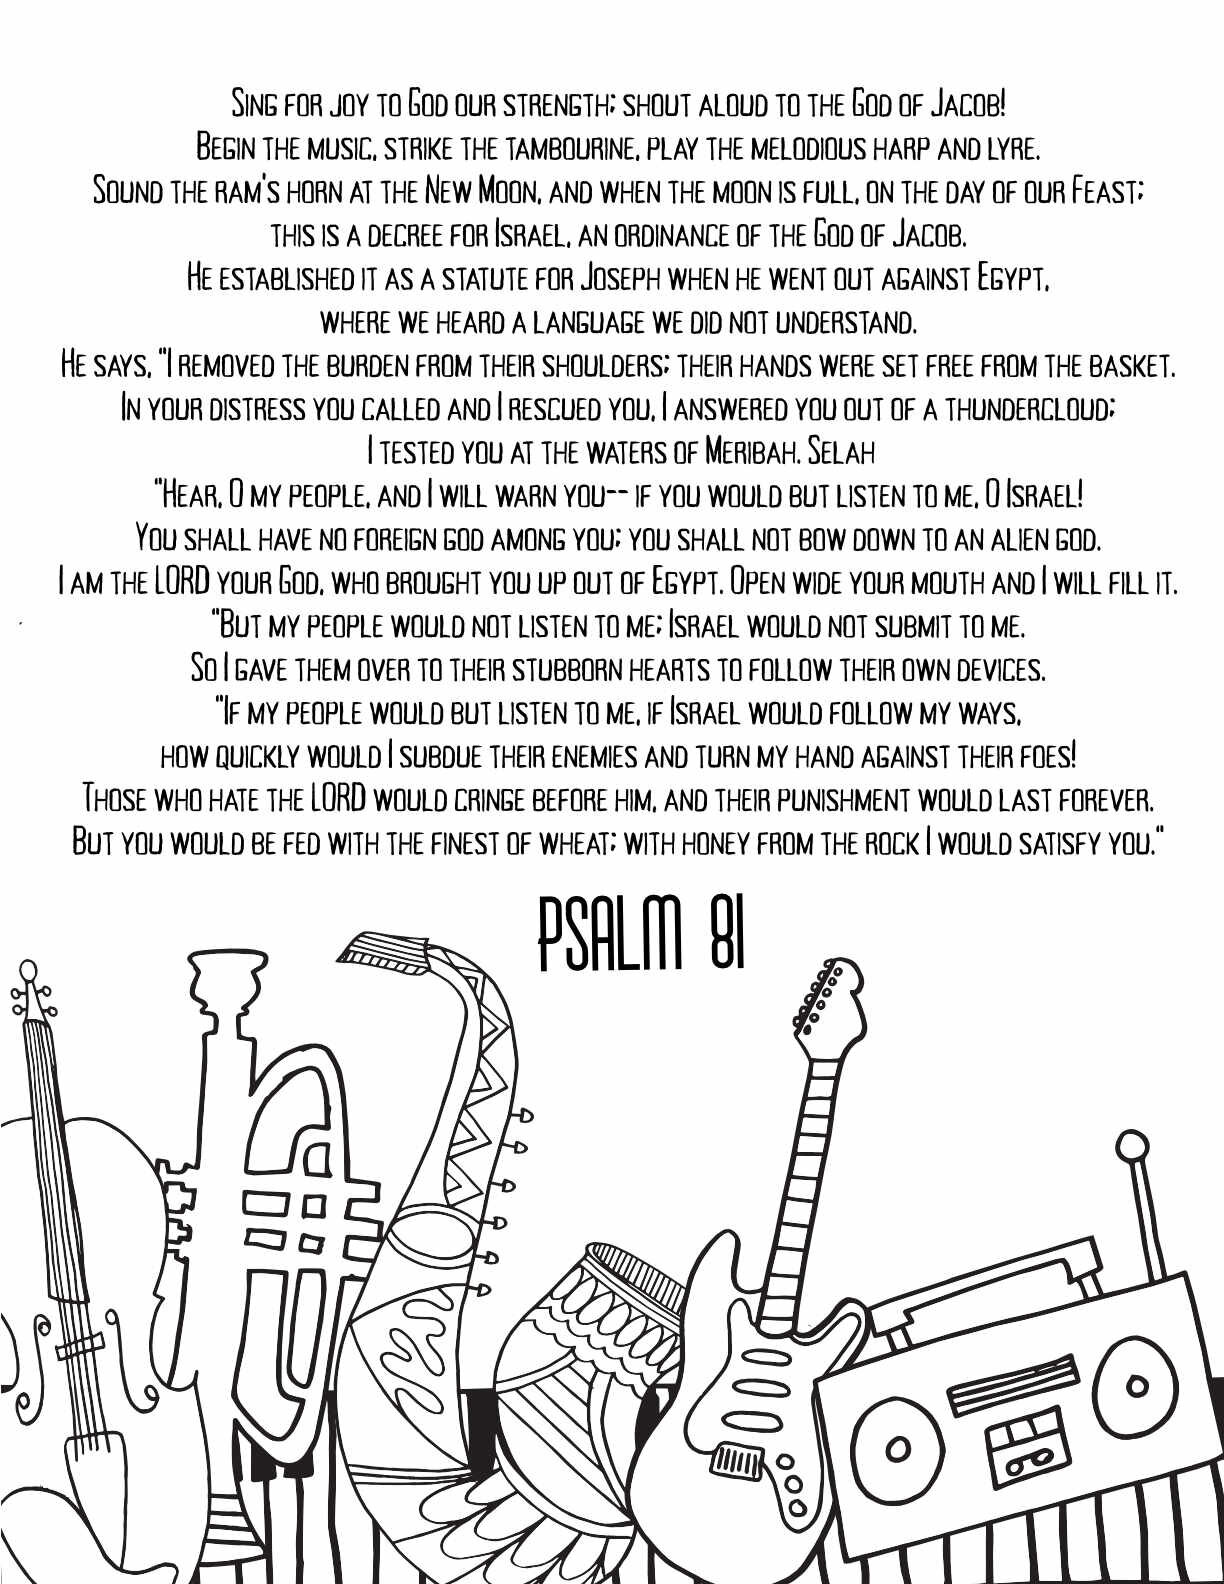 10 Free Printable Psalm Coloring Pages - Download and Color Adult Scripture - Psalm 81CLICK HERE TO DOWNLOAD THIS PAGE FREE